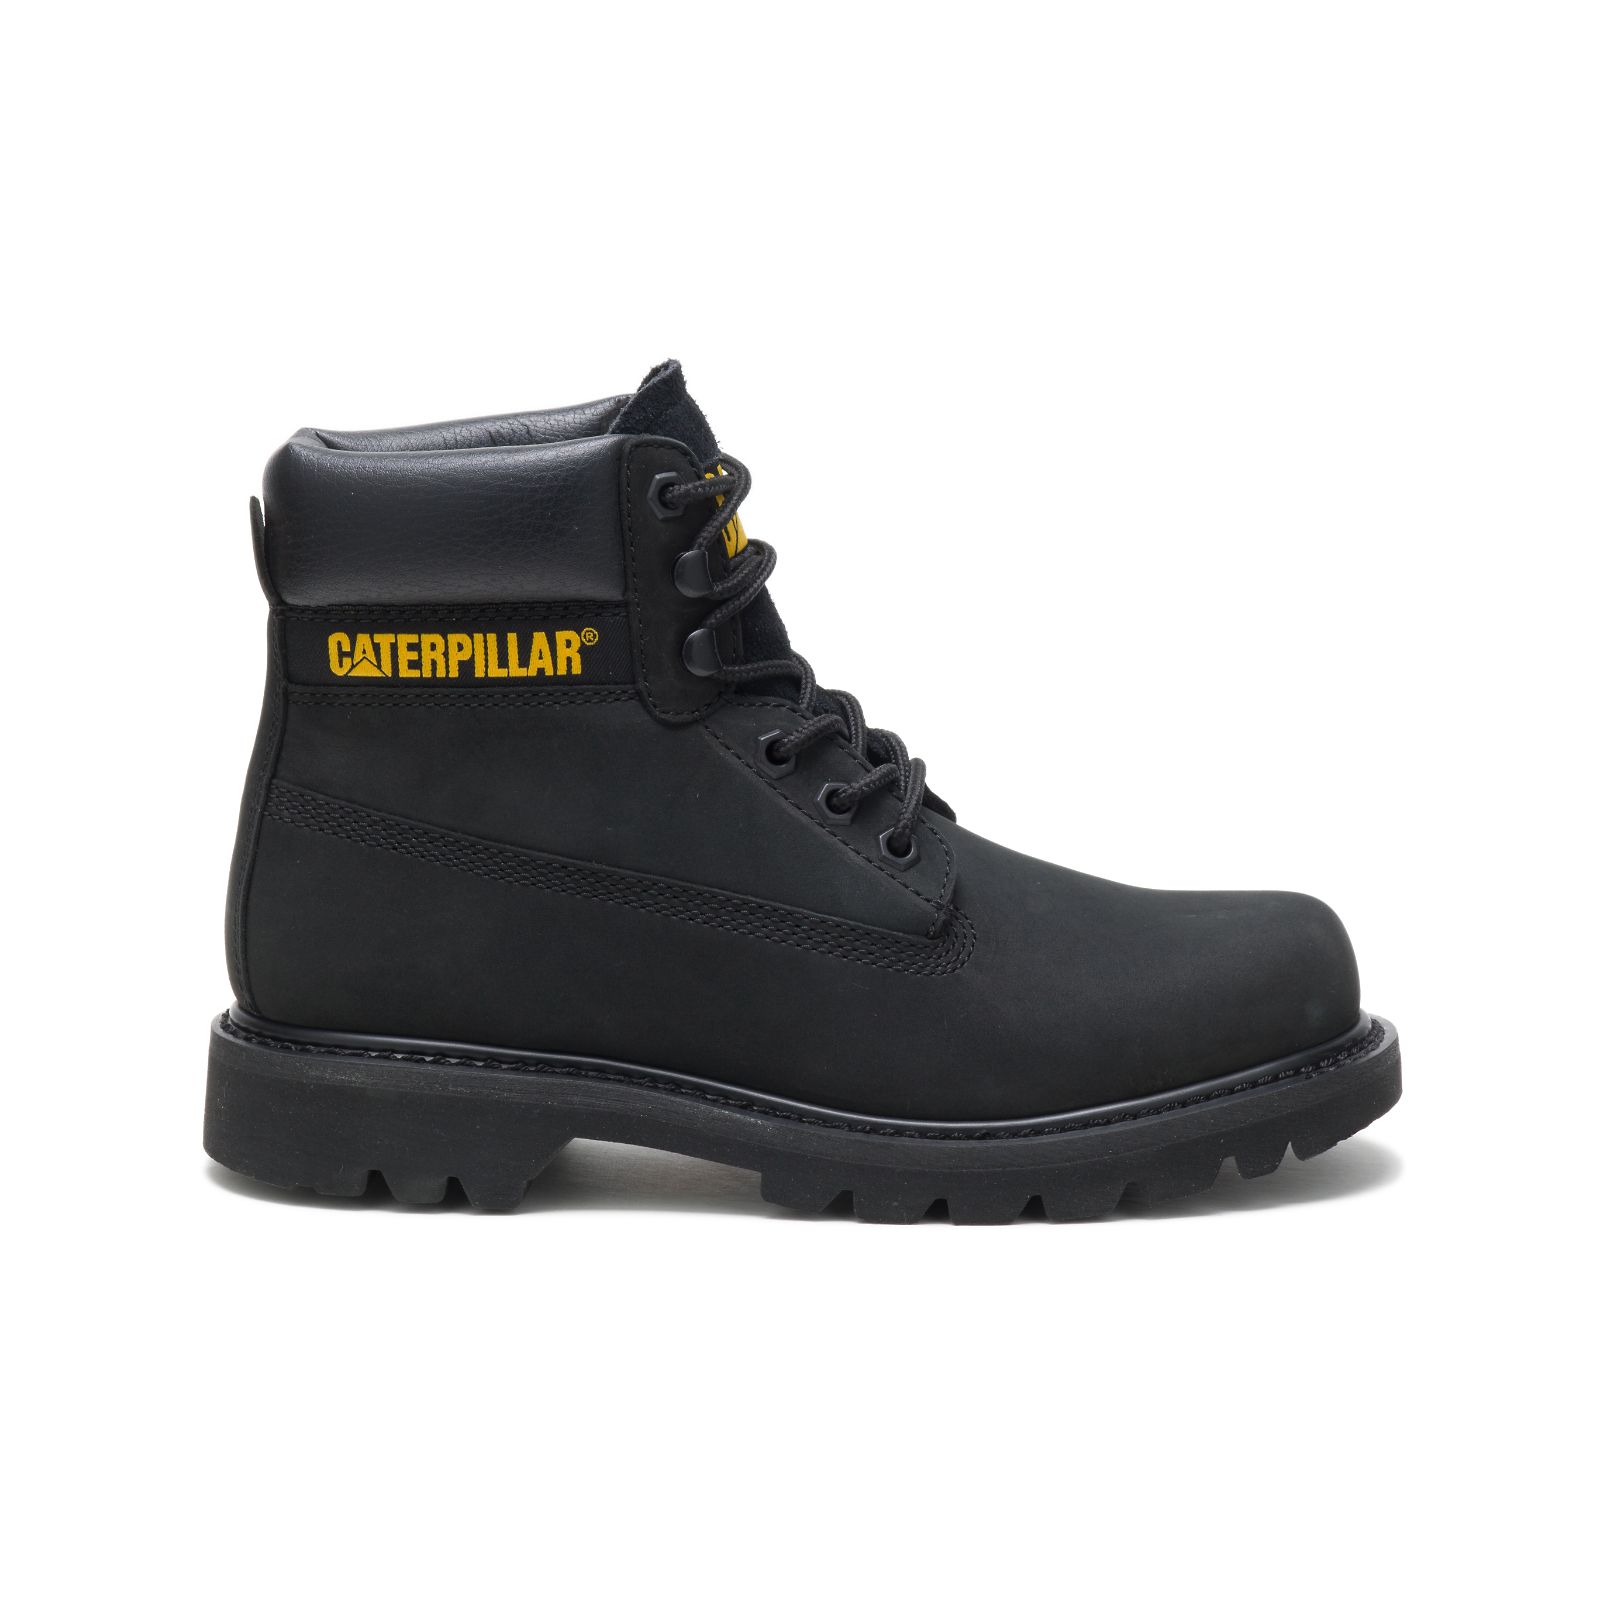 Caterpillar Colorado Philippines - Womens Casual Boots - Black 92518IETW